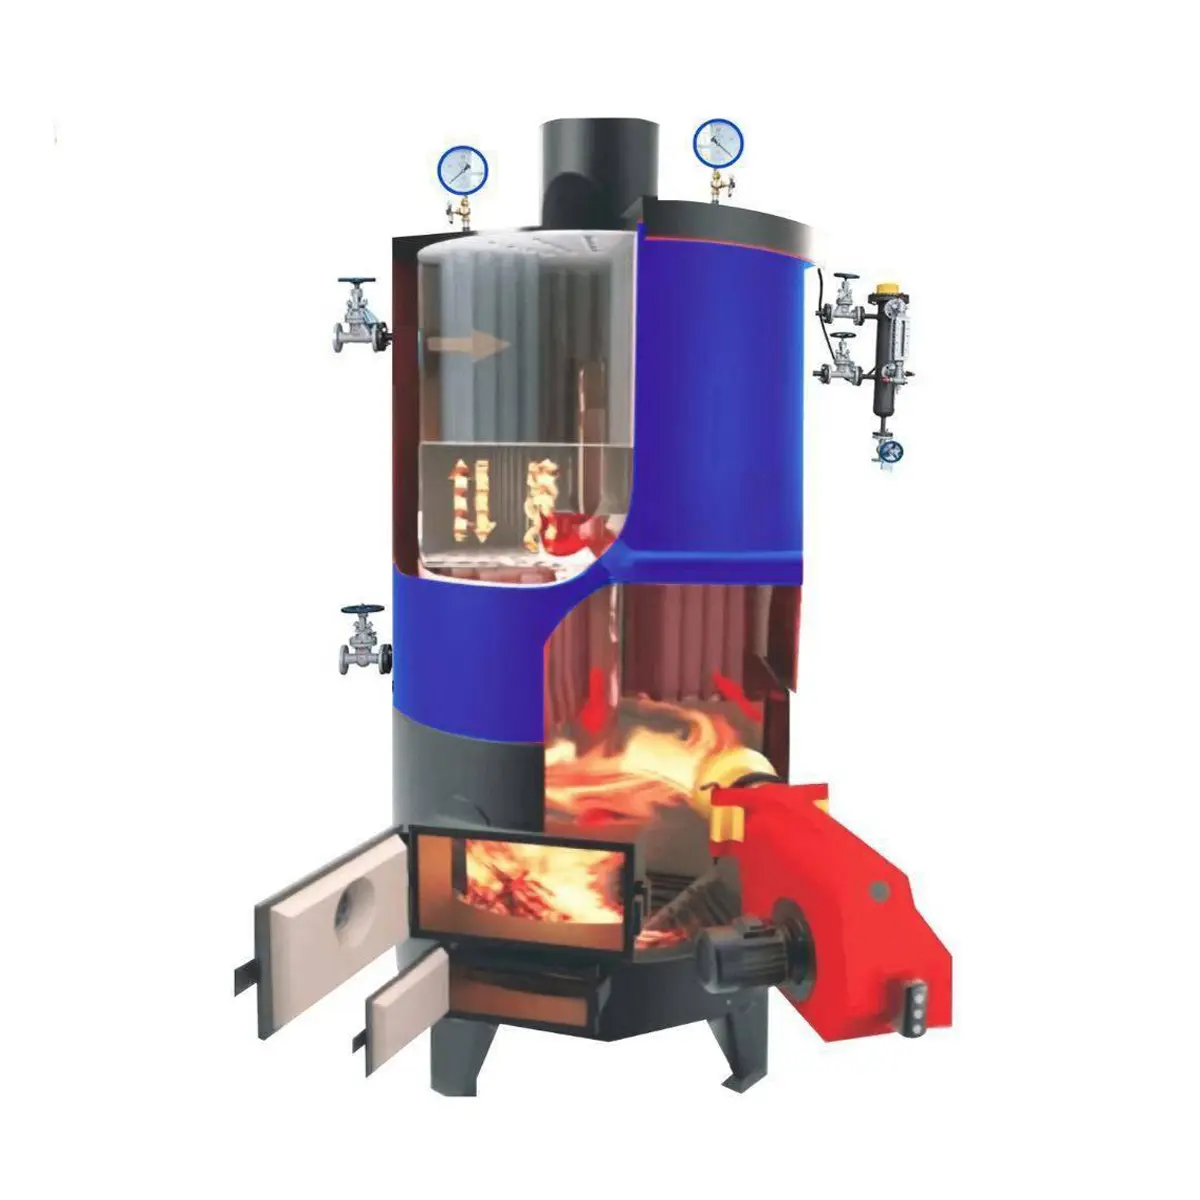 Great Quality Industrial Water Boiler 80 KW Power Capacity Product Of Uzbekistan Boilers For Heating